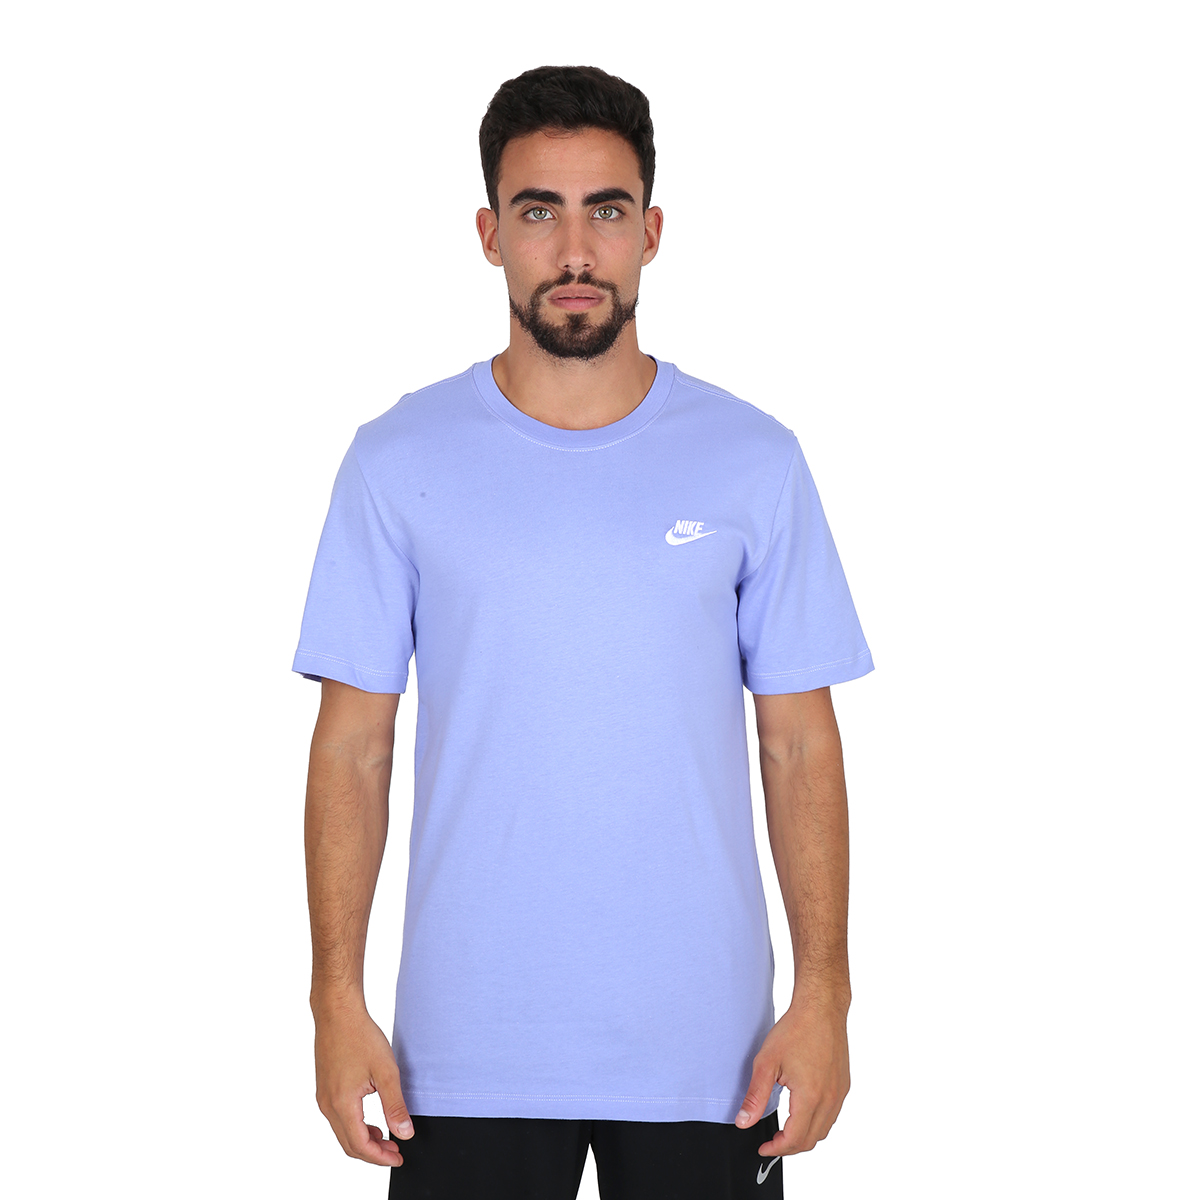 Remera Urbana Nike Nsw Club Hombre,  image number null